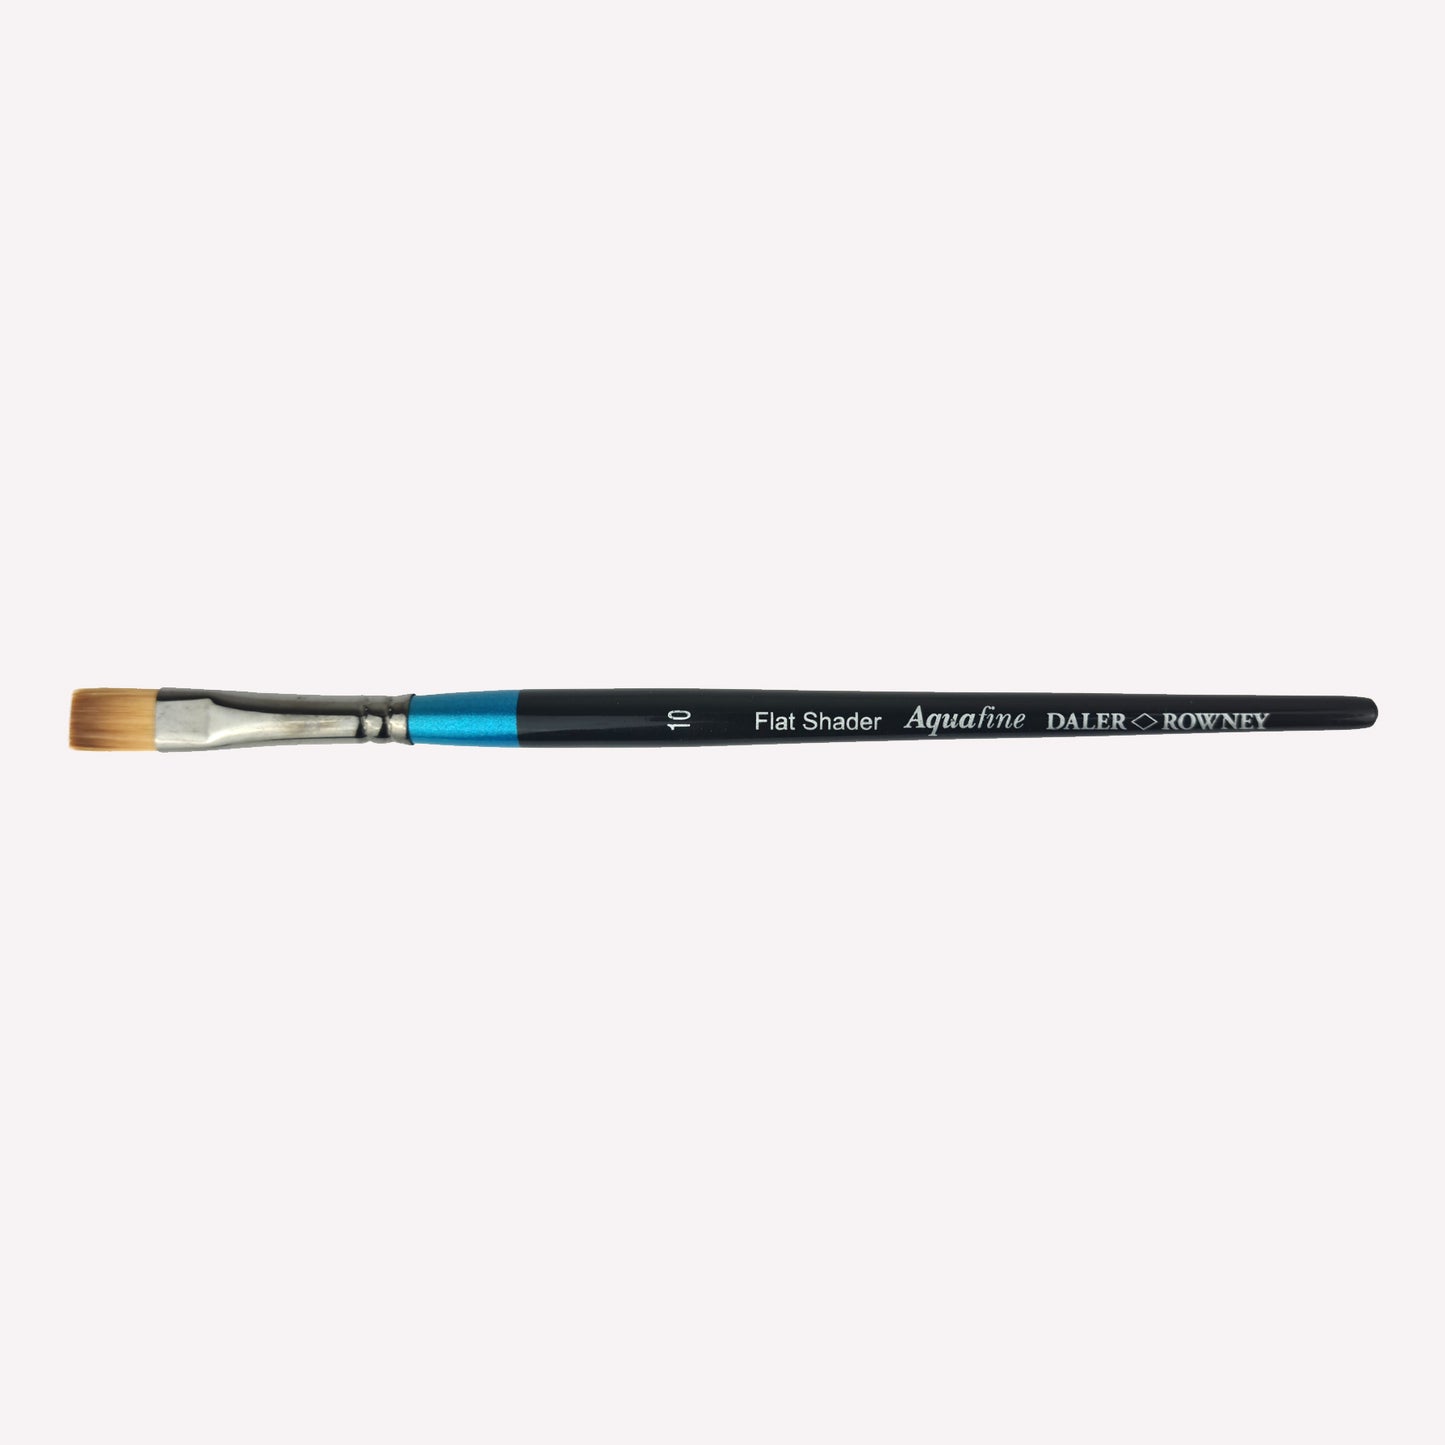 Daler Rowney Aquafine flat shader paintbrush in size 10. The  filaments have a flat, square shape, perfect for blending colour and blocking in shapes. Brushes have a classy black handle with blue detailing and a silver ferrule.